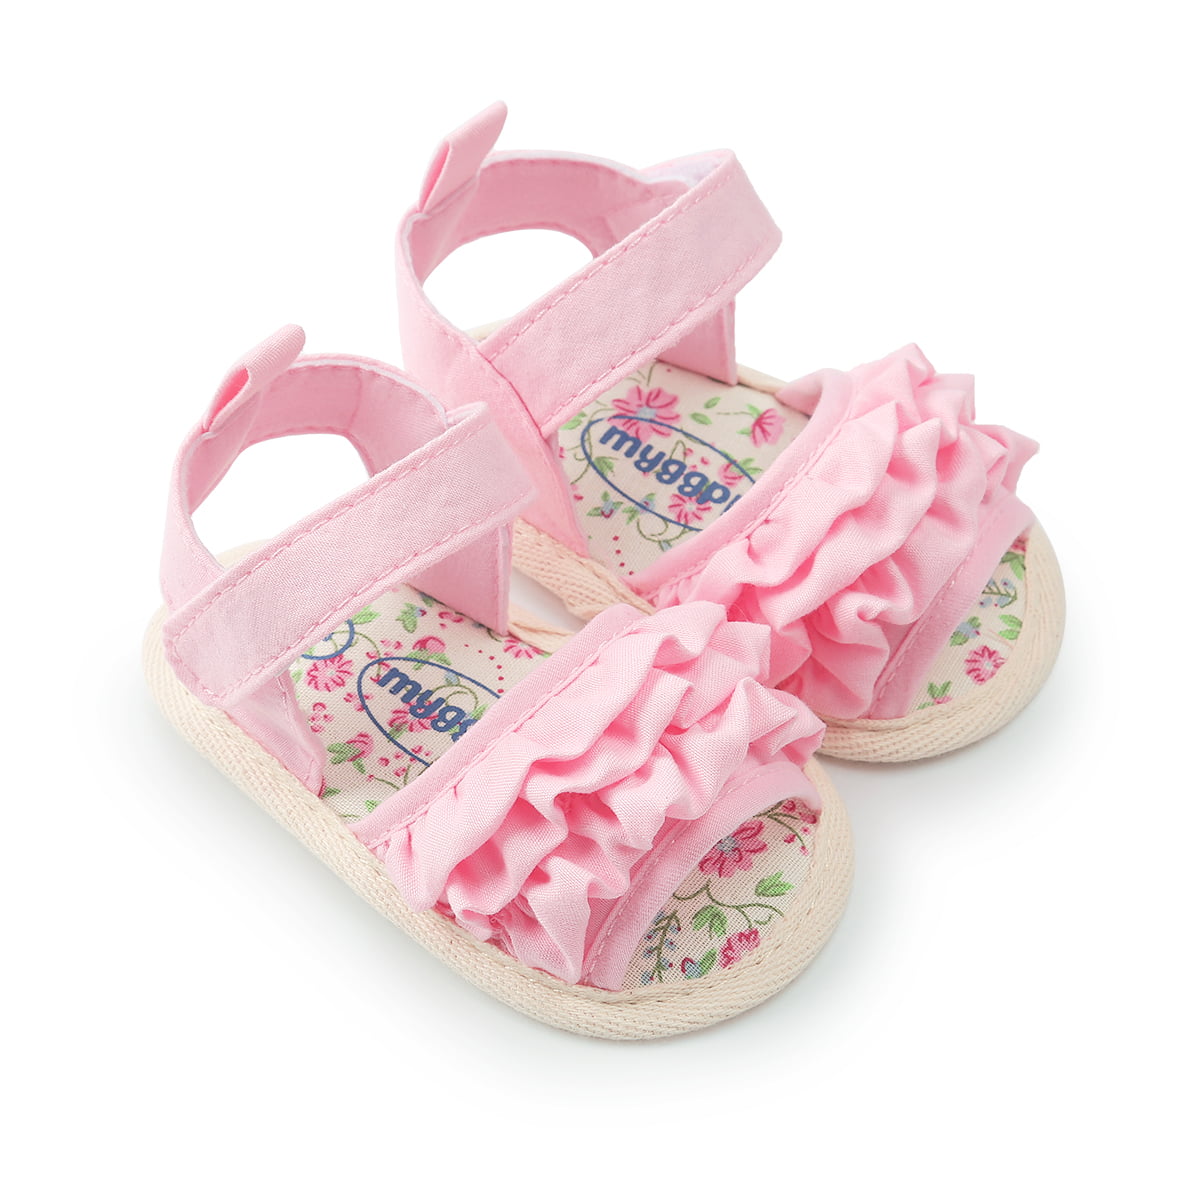 Baby Girls Summer Bohemian Sandals 5-9 Years Little Kids Elegant Floral Beach Slippers Shoes Rubber Sole Sneaker Boots